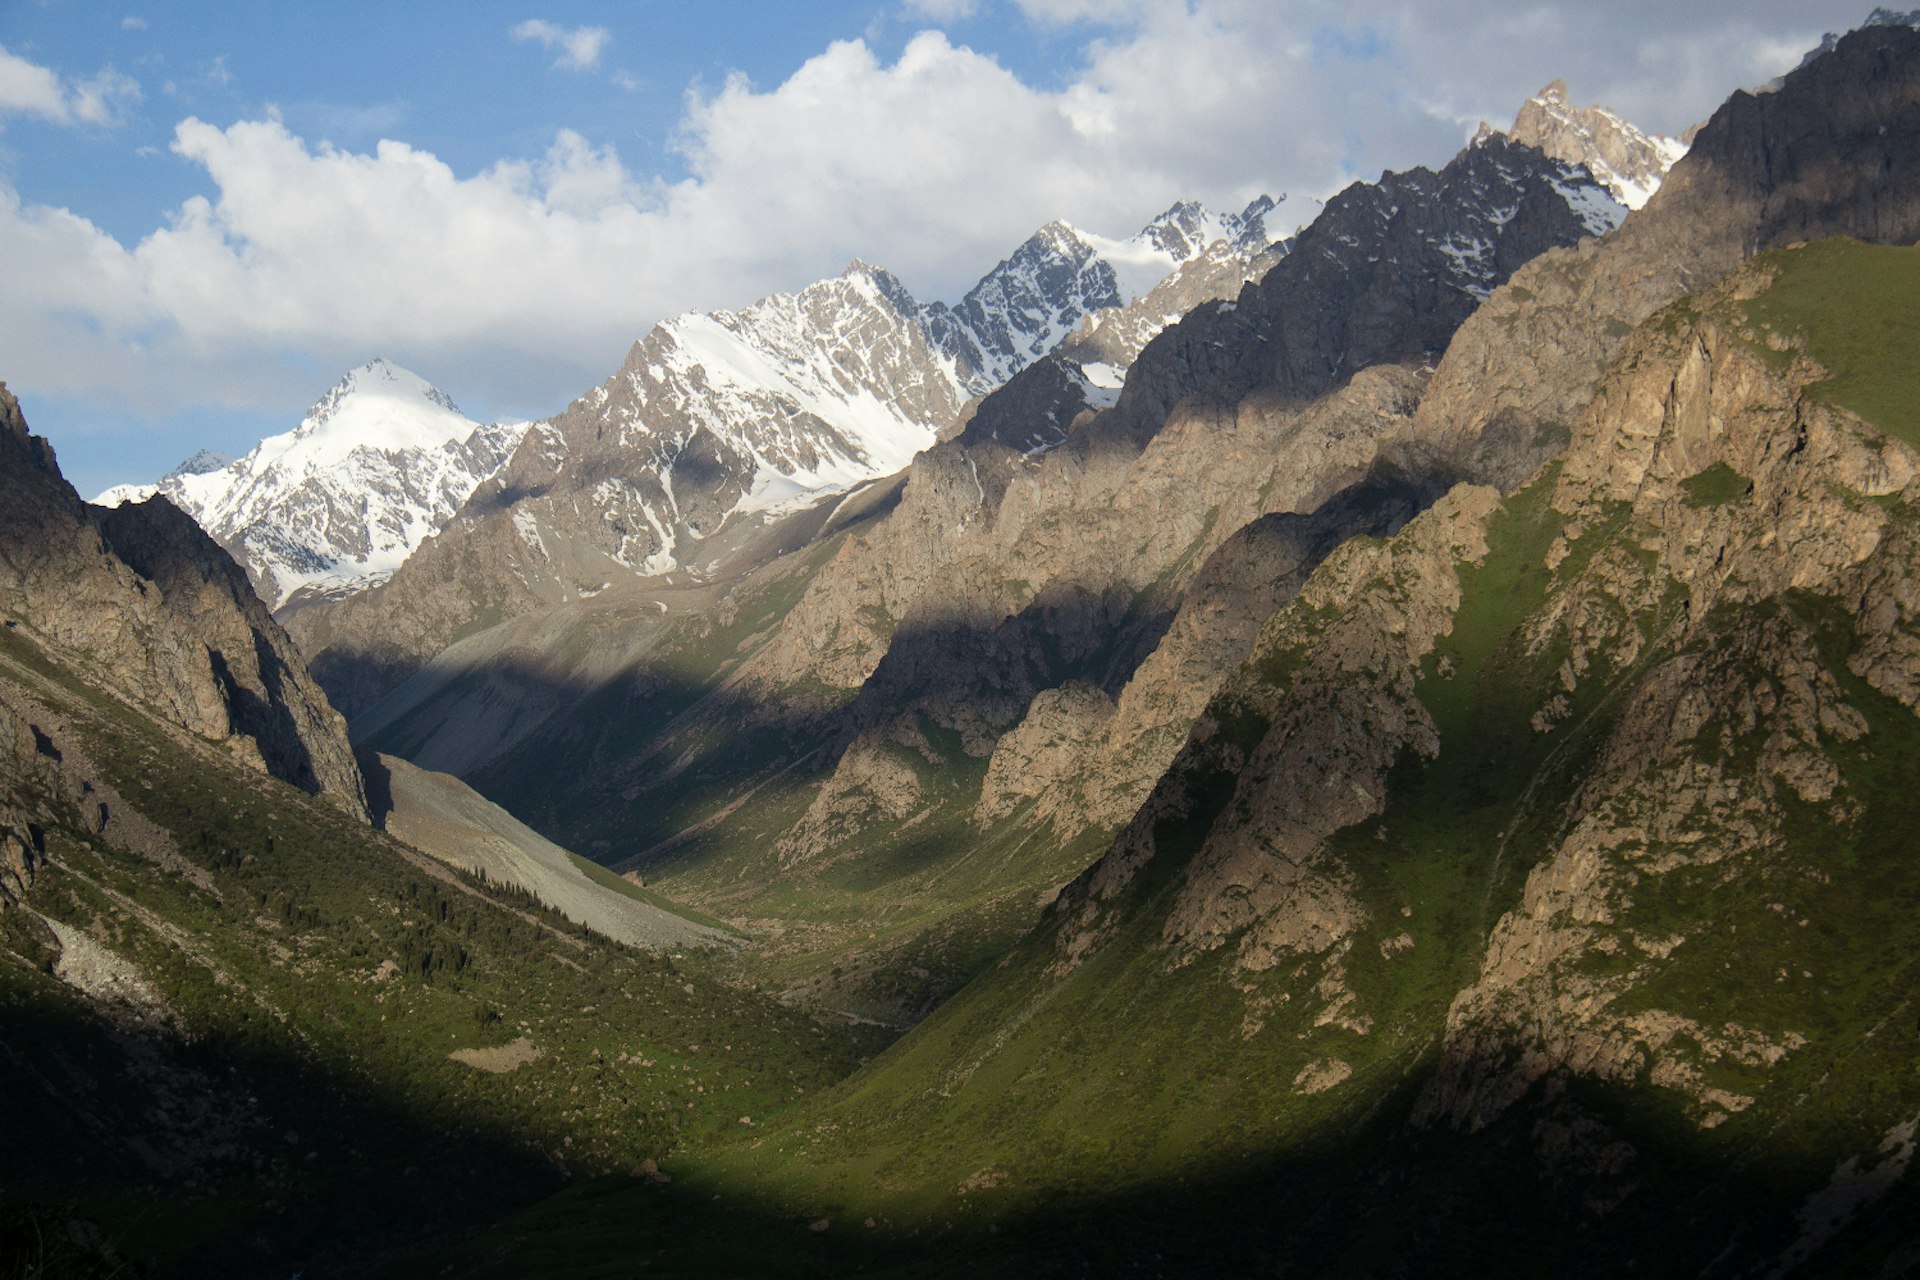 A longer trek offers sweeping Tian Shan views. Image by Stephen Lioy / Lonely Planet